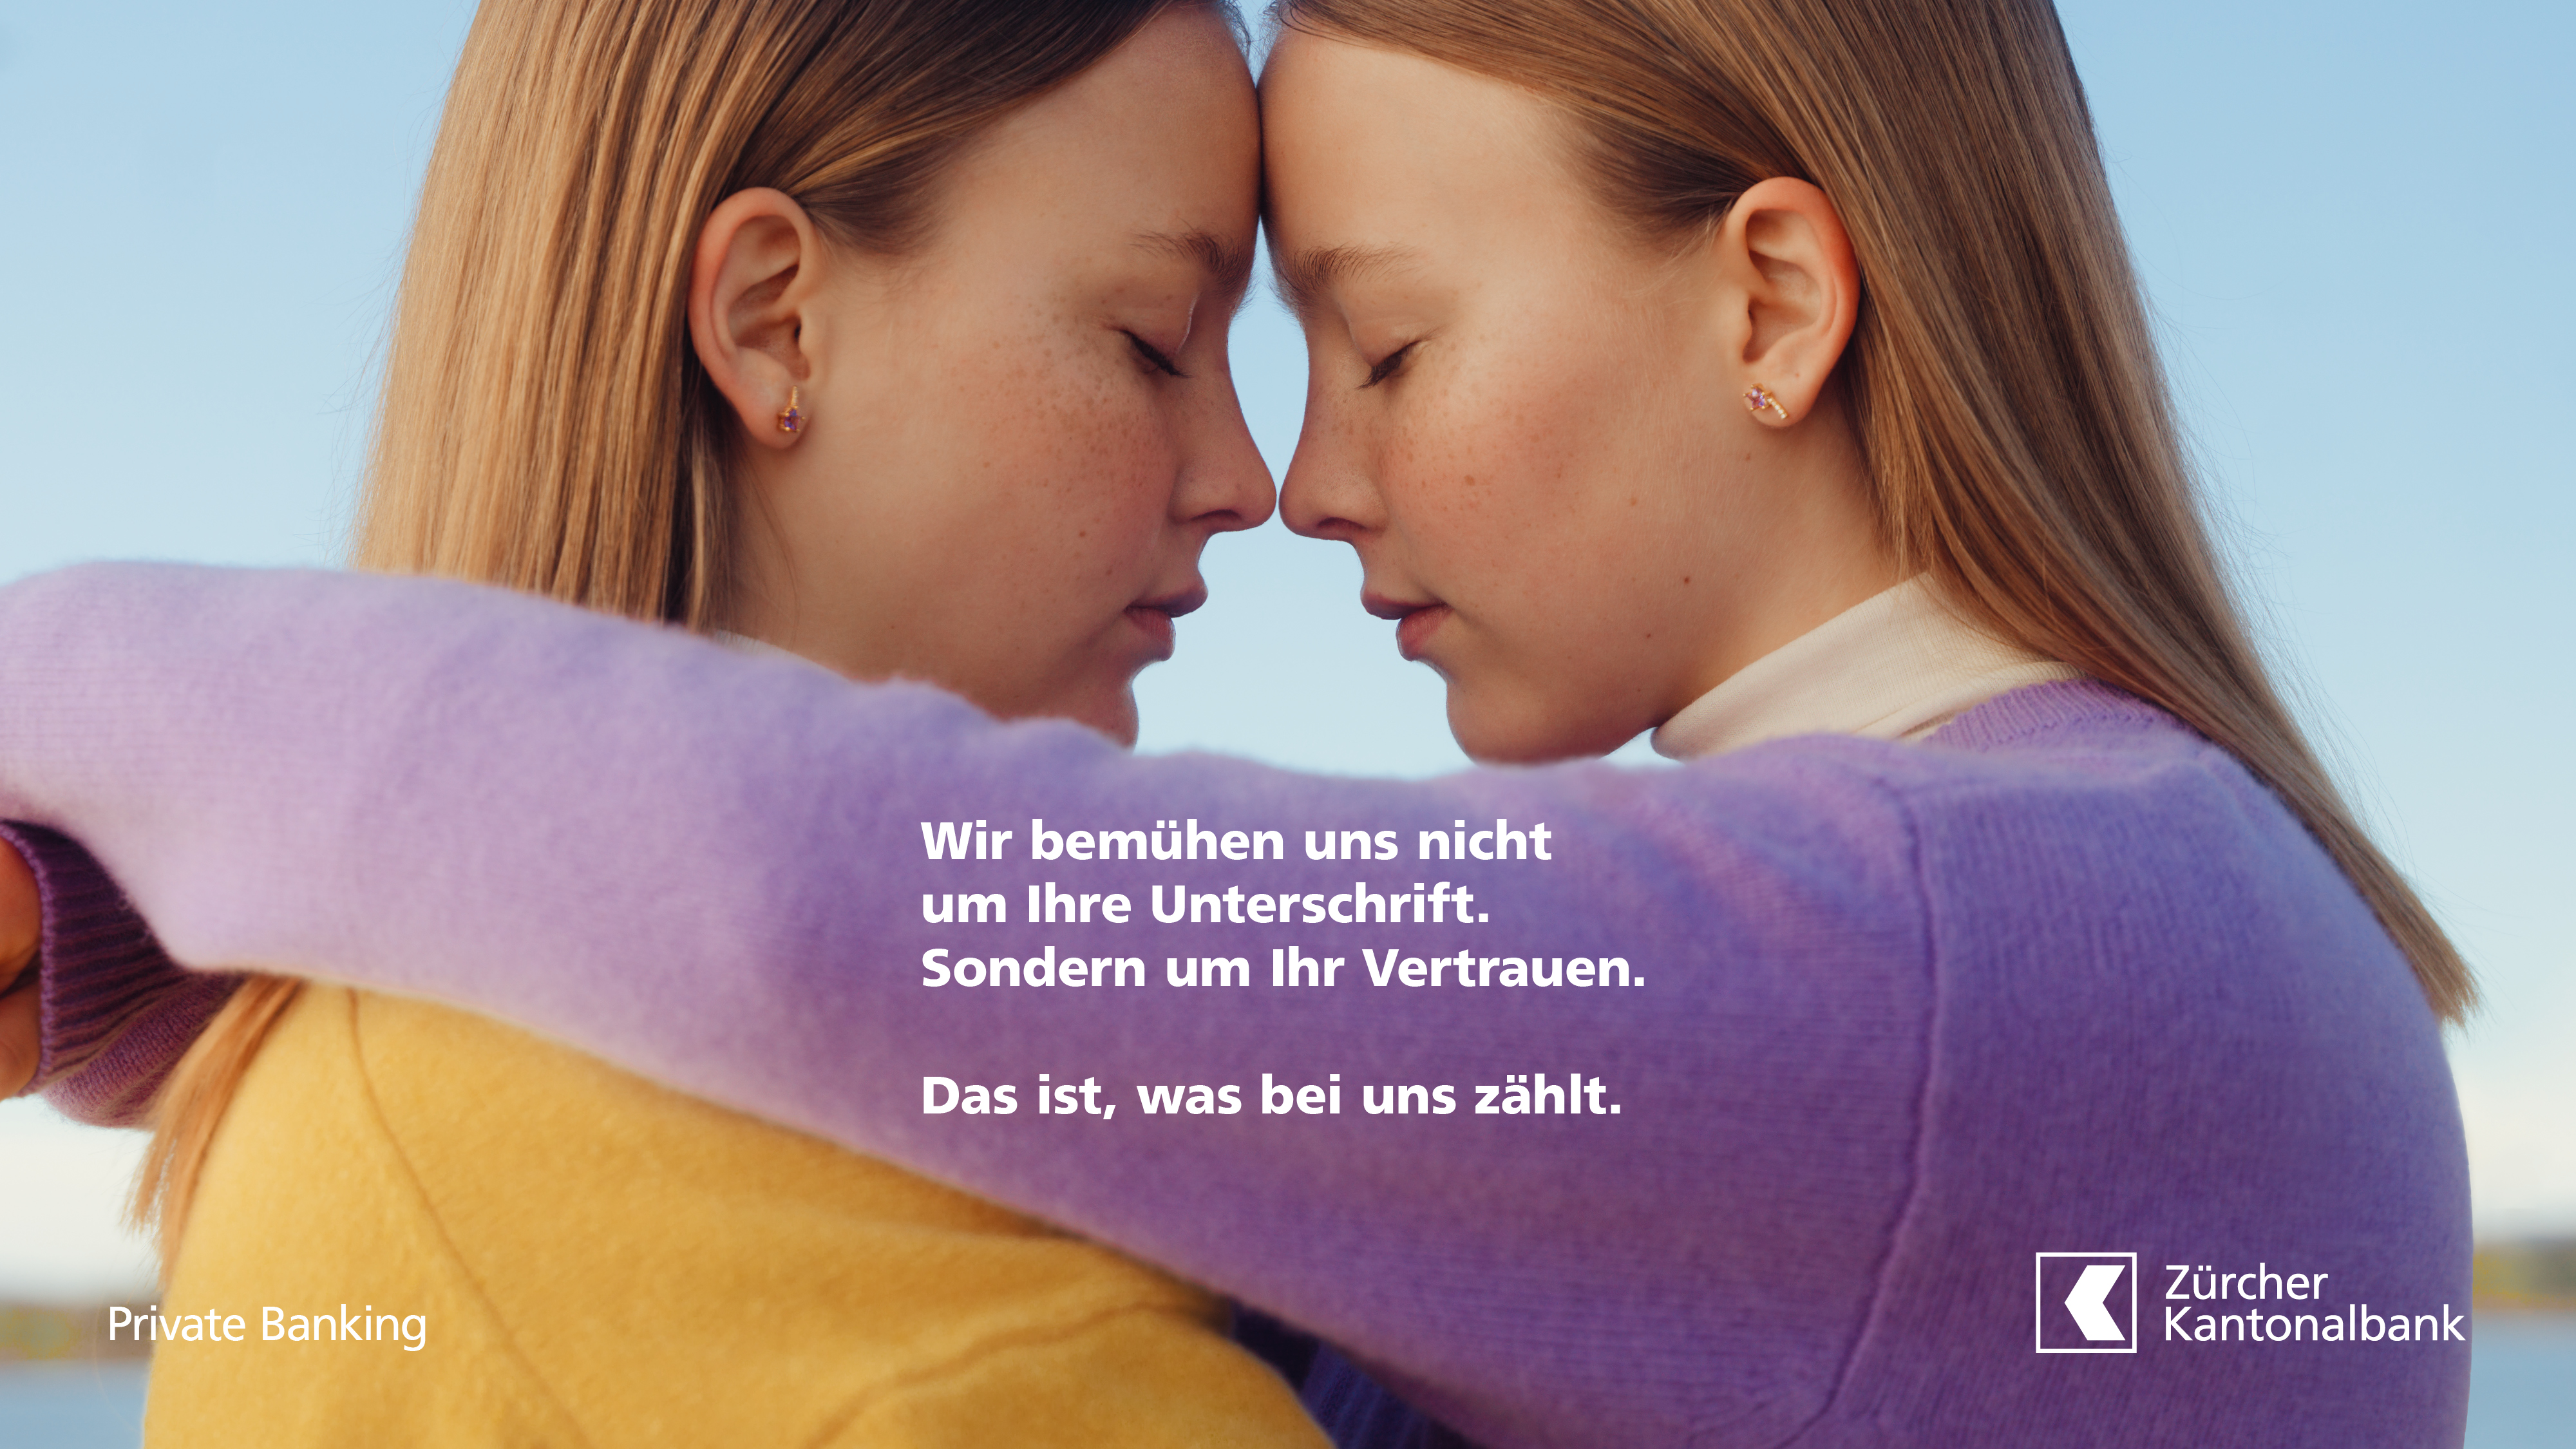 An advertisement showing a close-up of two girls in an embrace with a message about trust.